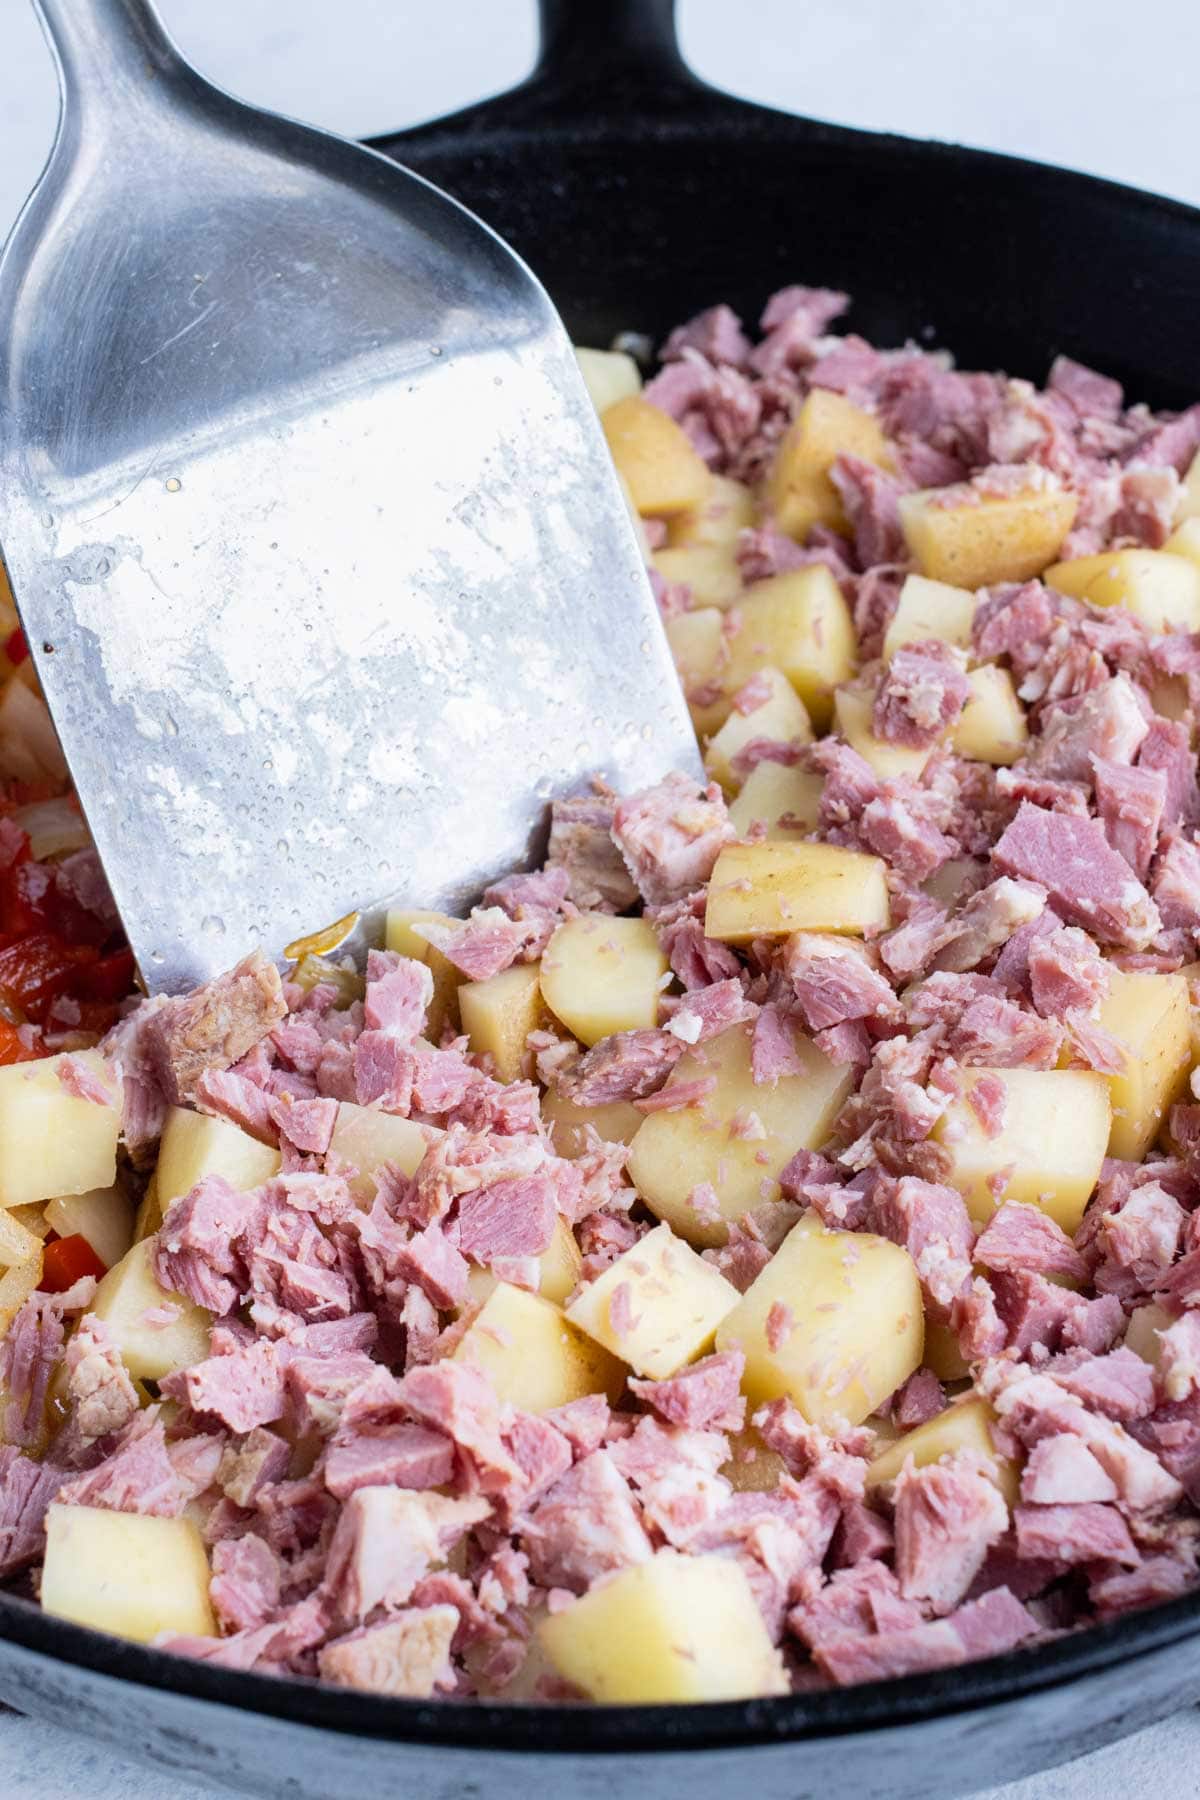 Corned beef and potatoes are added to the skillet.